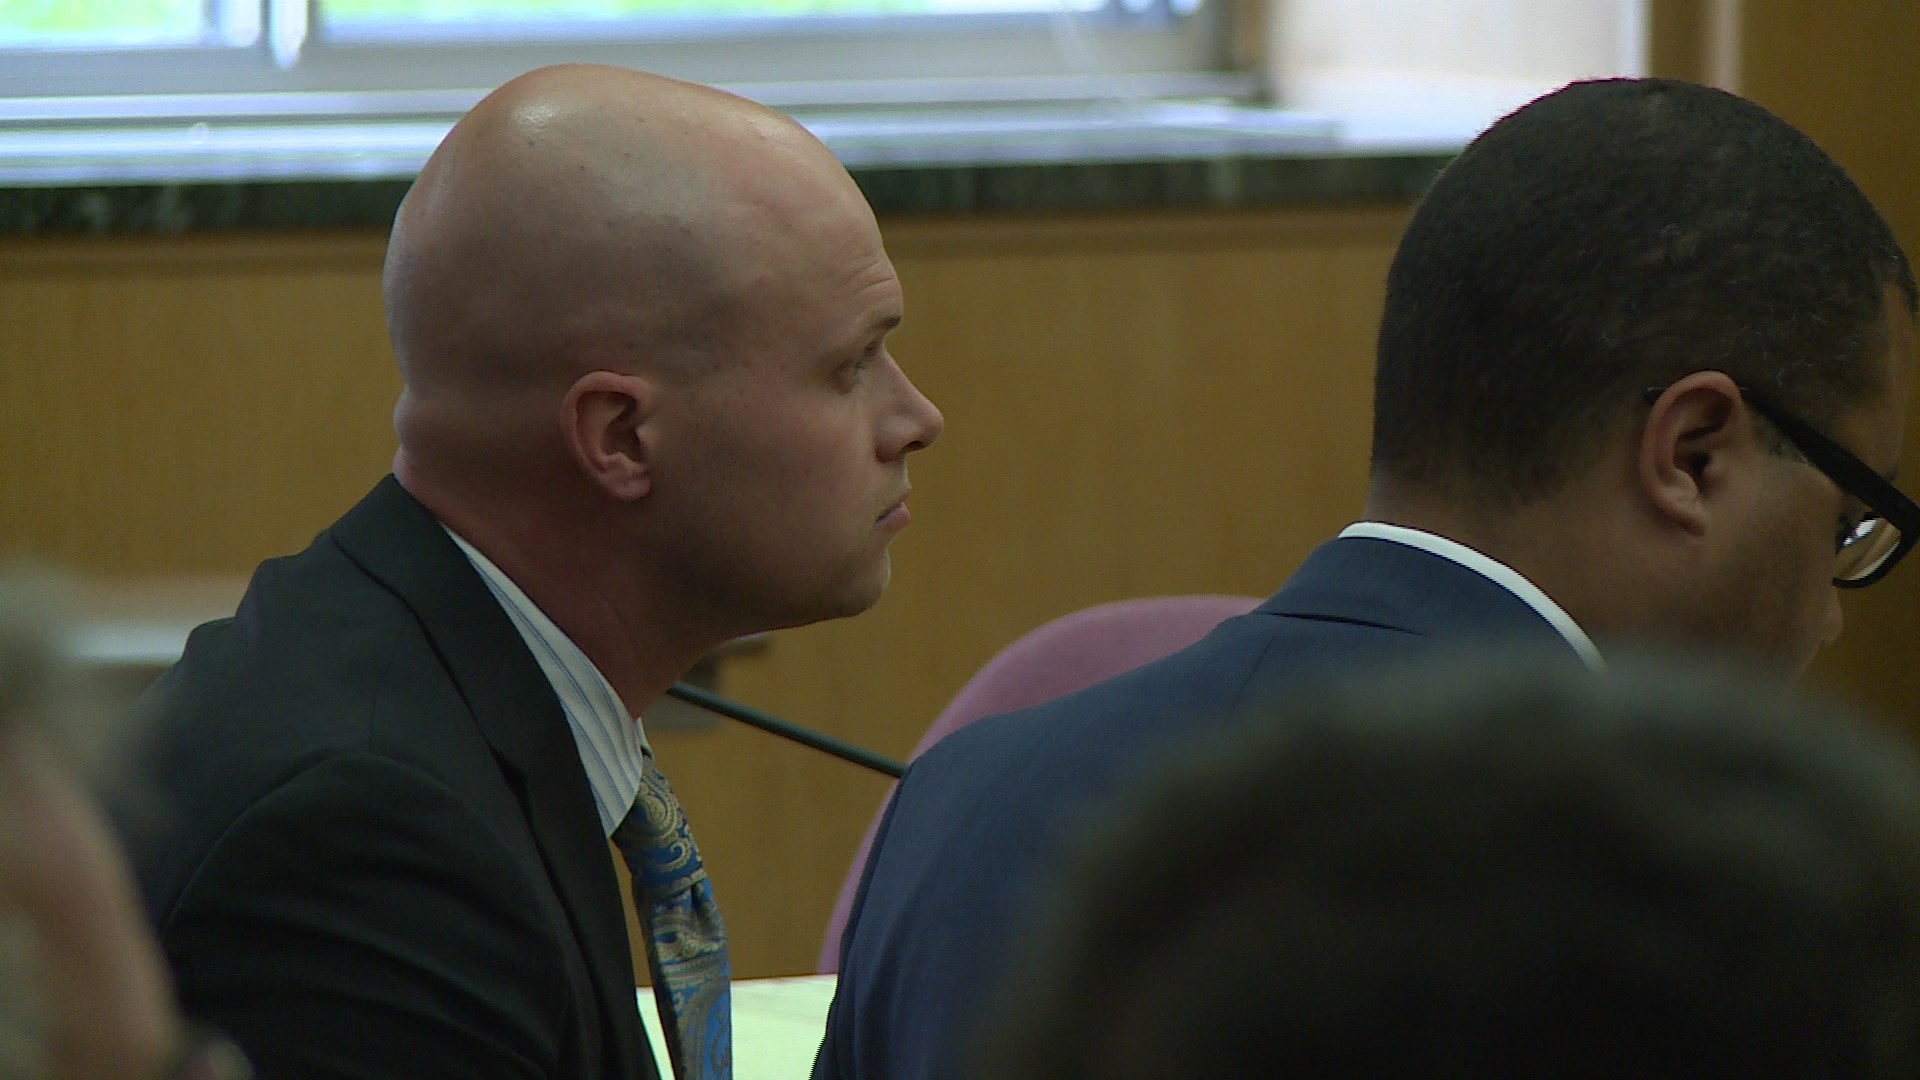 NEW INFORMATION Former teacher accused of sexual assault appears in court